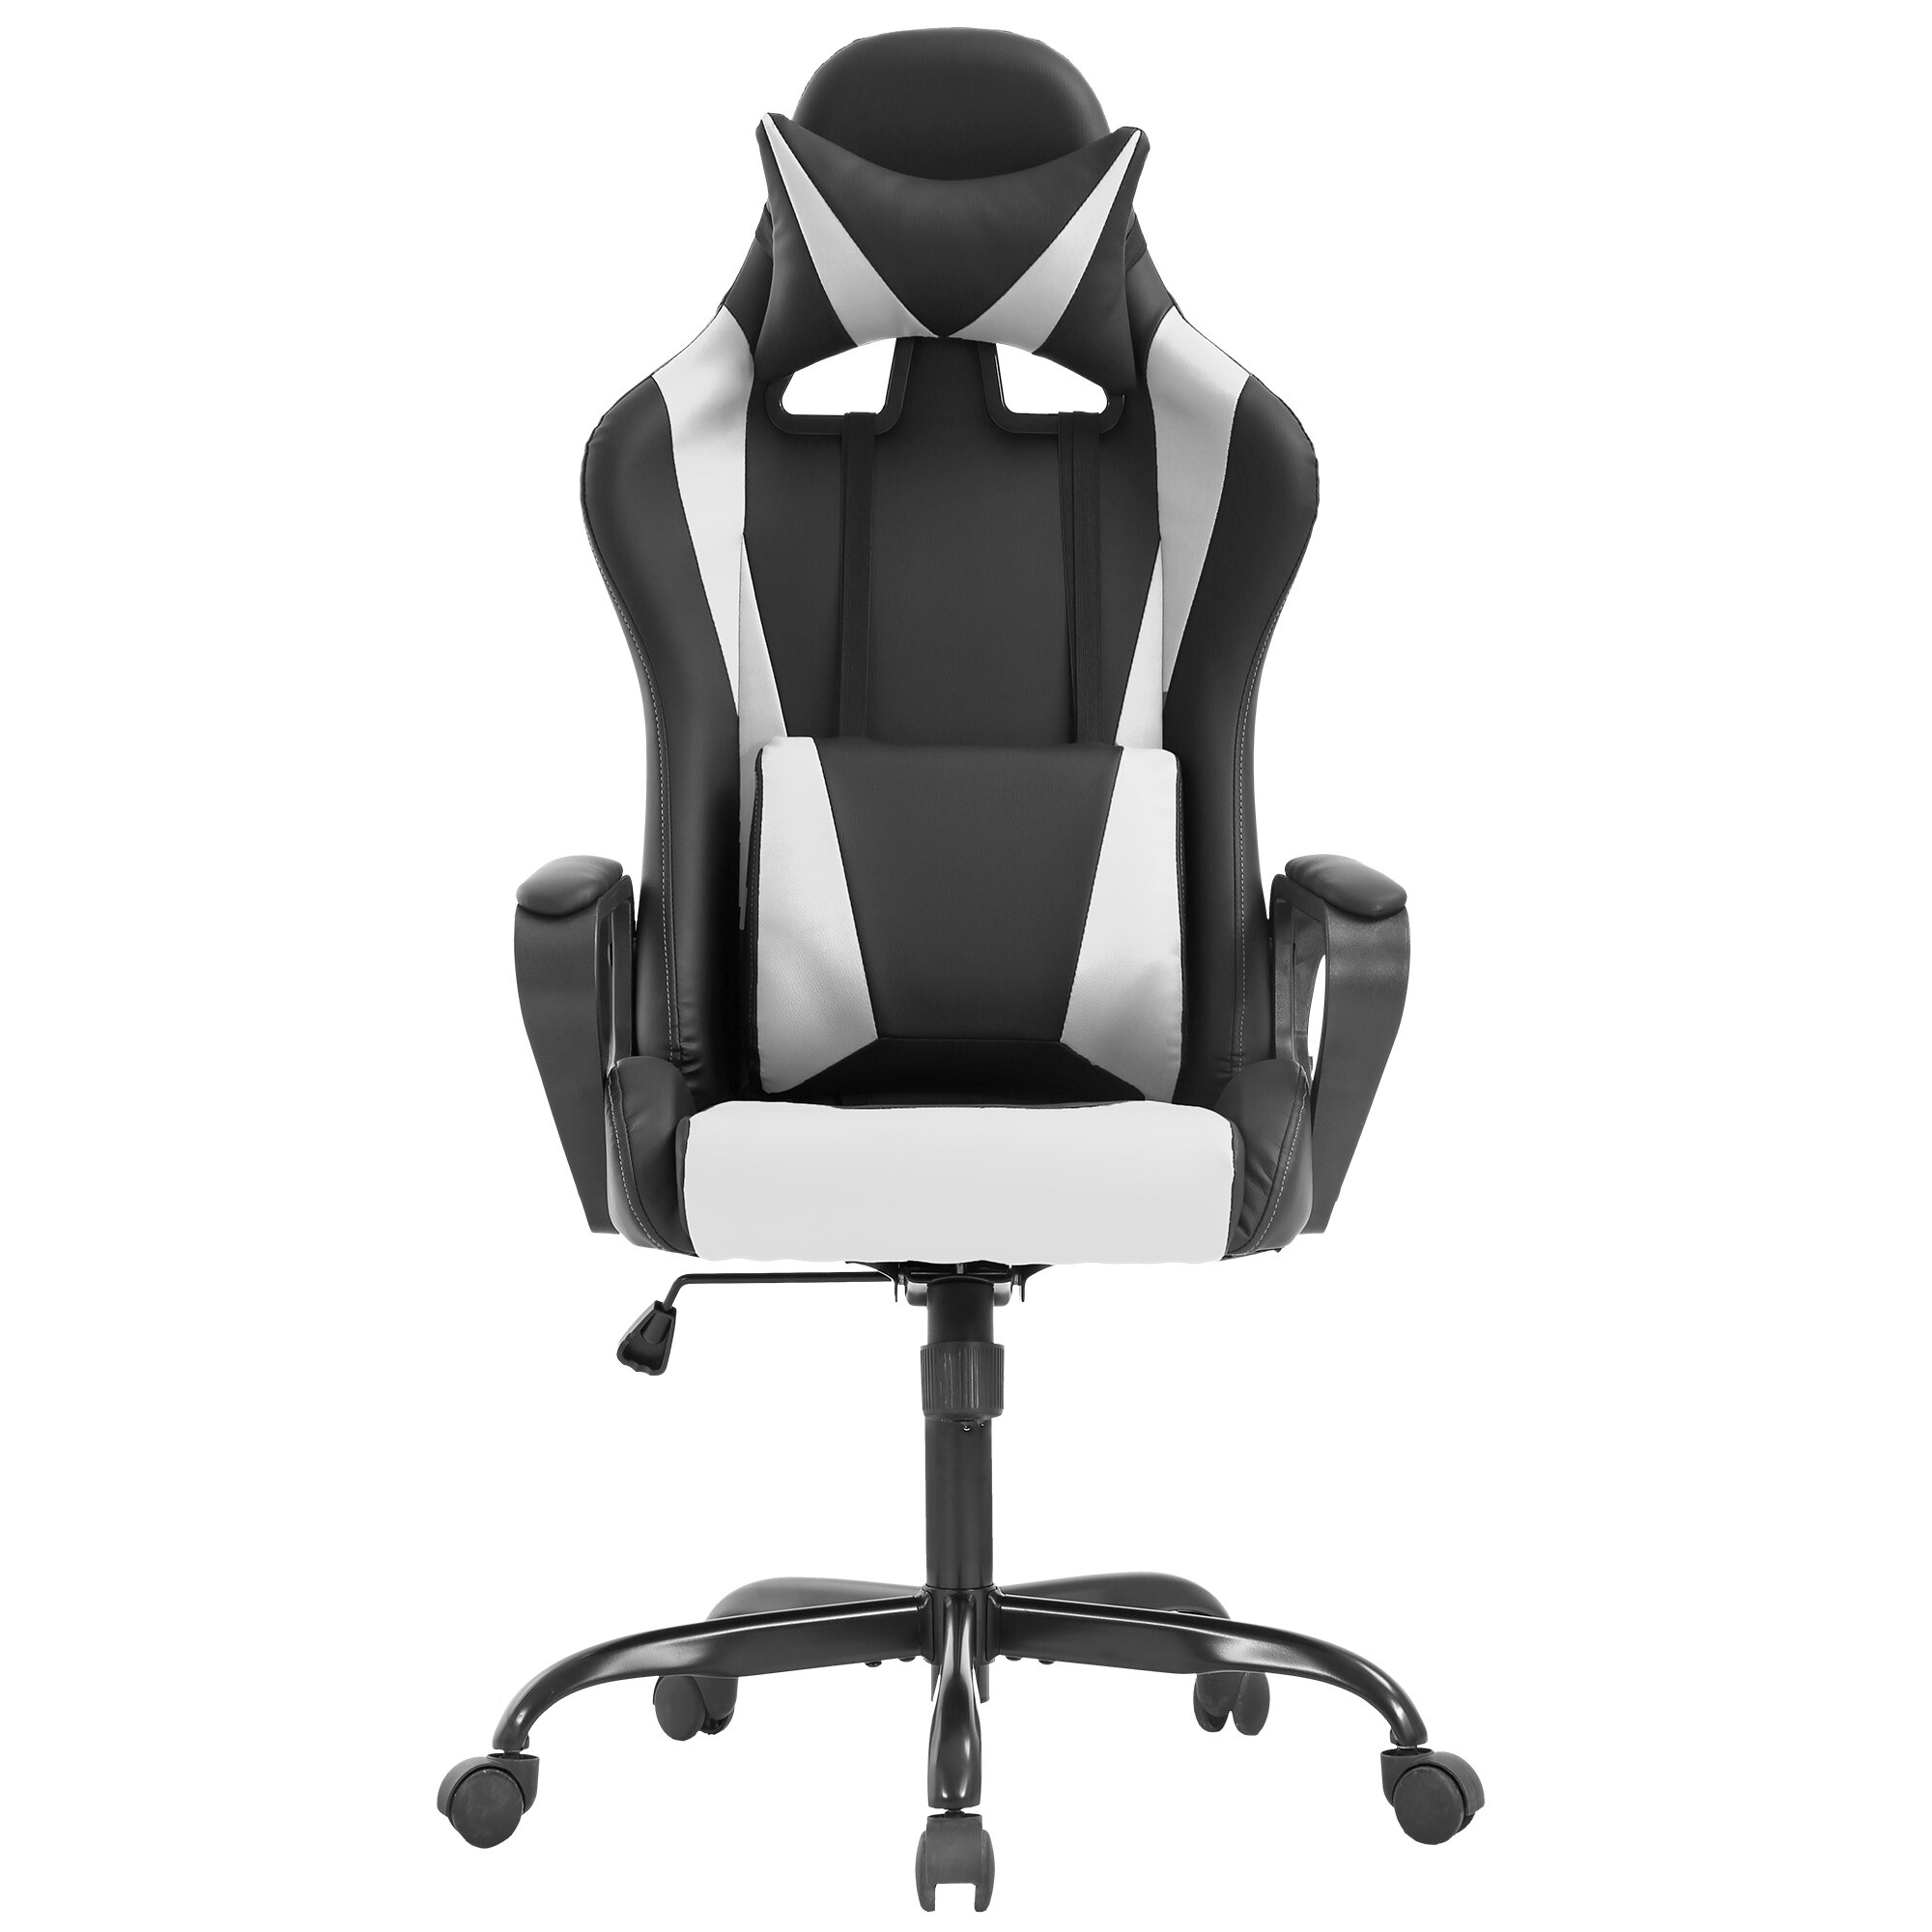 2022 Office Chair, Gaming Chair Ergonomic Desk Computer PU Leather  Executive Swivel with Flip-up Armrests and Lumbar Support for 並行輸入 